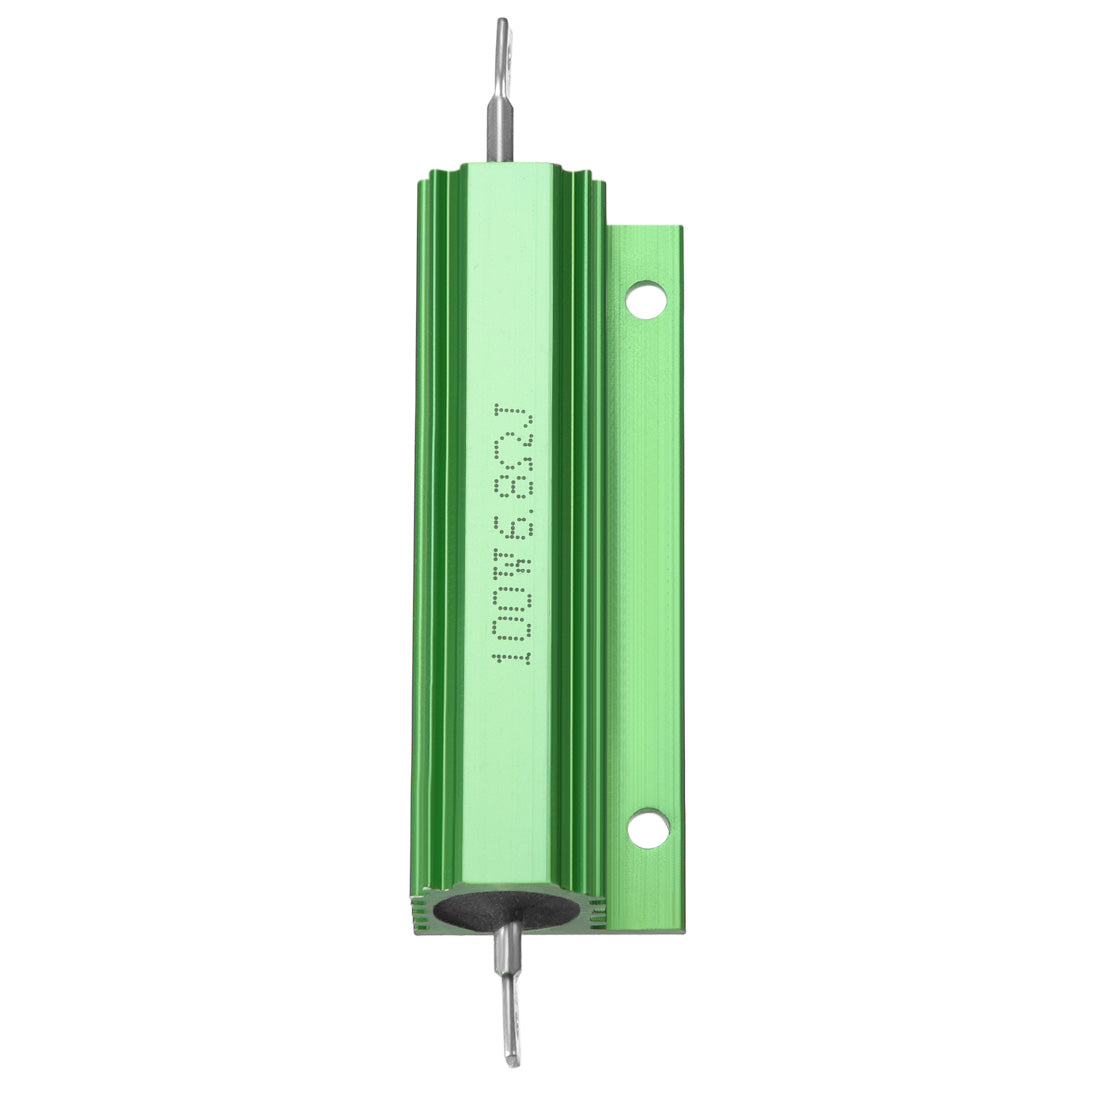 uxcell Uxcell Aluminum Case Resistor 100W 6.8 Ohm Wirewound Green for LED Replacement Converter 100W 6.8RJ